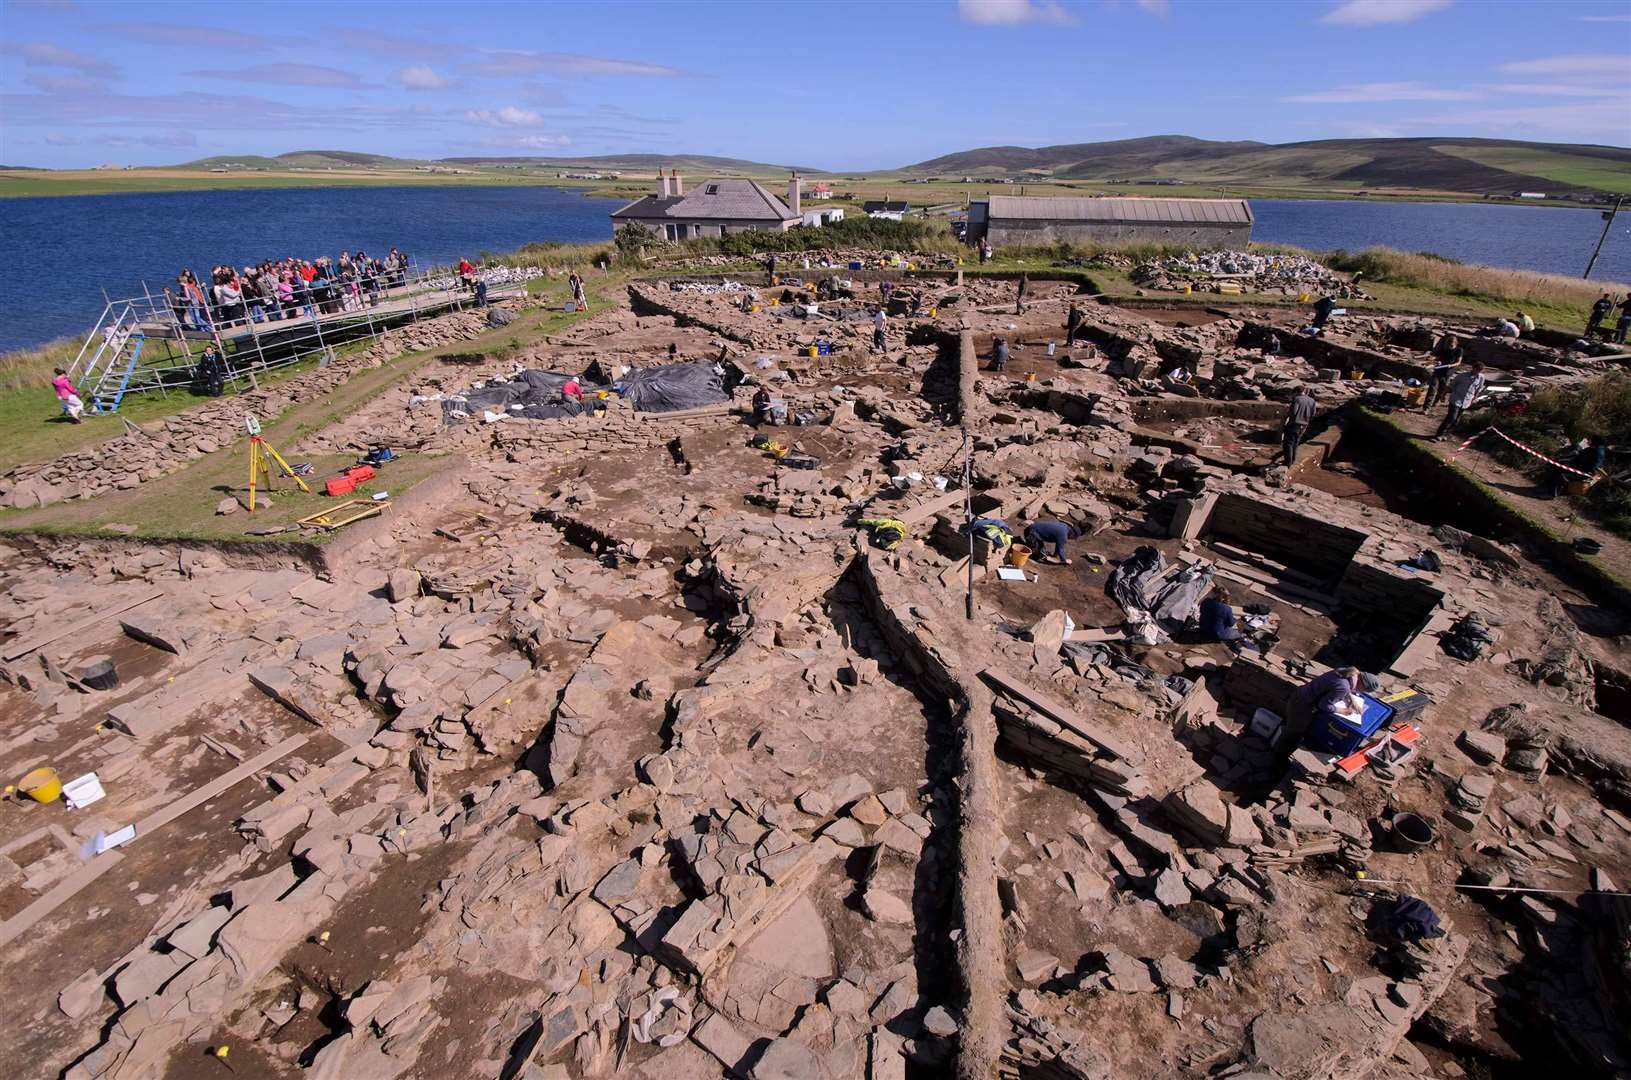 UHI research at the Ness of Brodgar excavation has brought more visitors to Orkney, boosting the local economy. Photo: Jim Richardson